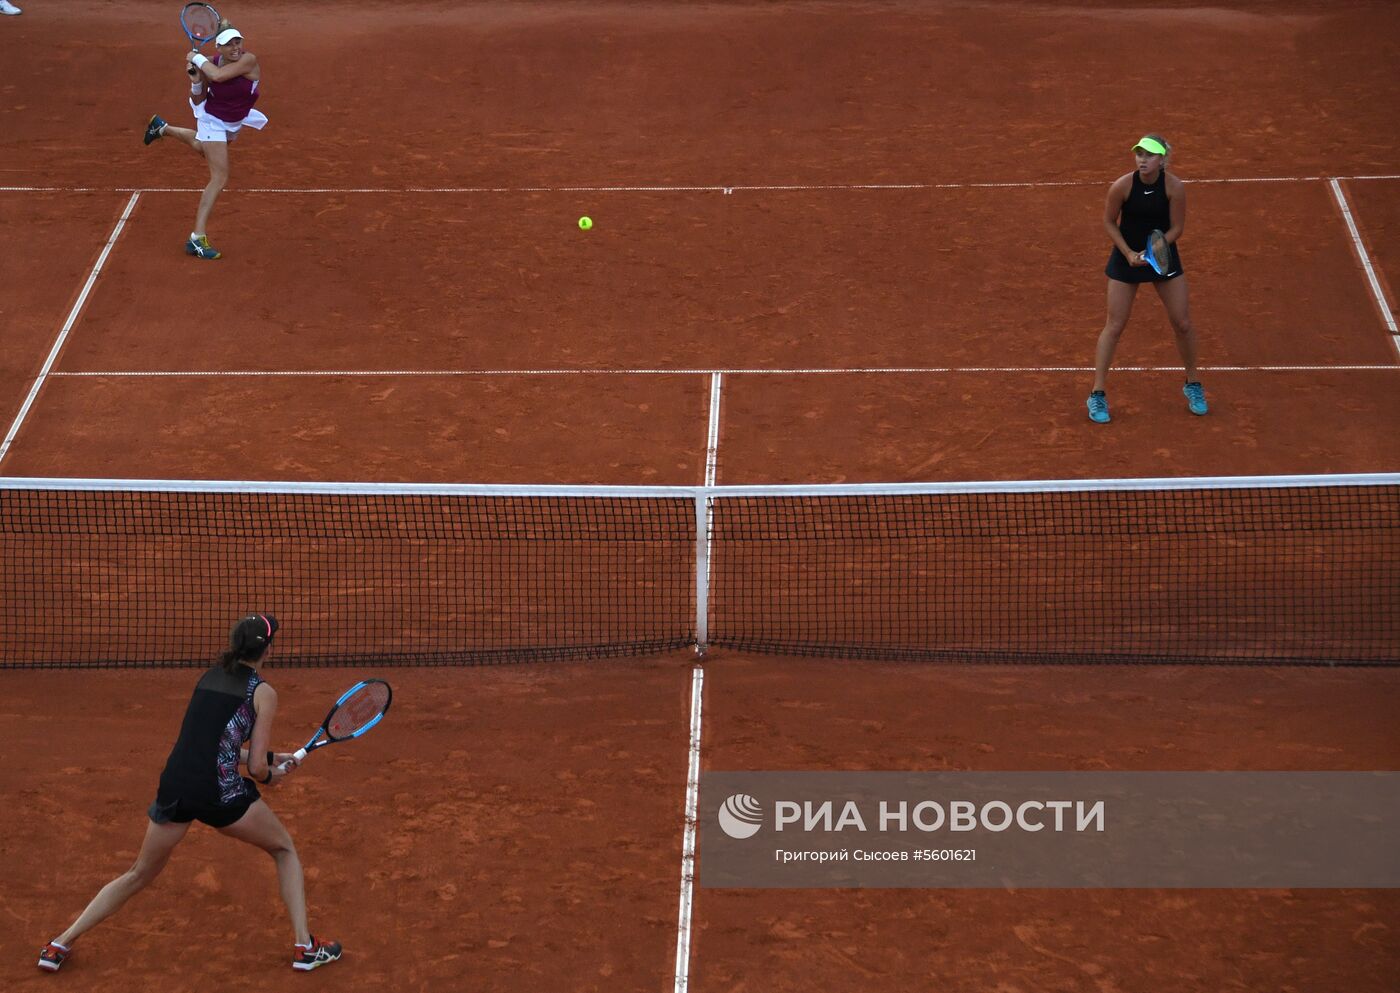 Теннис. WTA MOSCOW RIVER CUP. Финалы Теннис. WTA MOSCOW RIVER CUP. Финалы Теннис. WTA MOSCOW RIVER CUP. Финалы